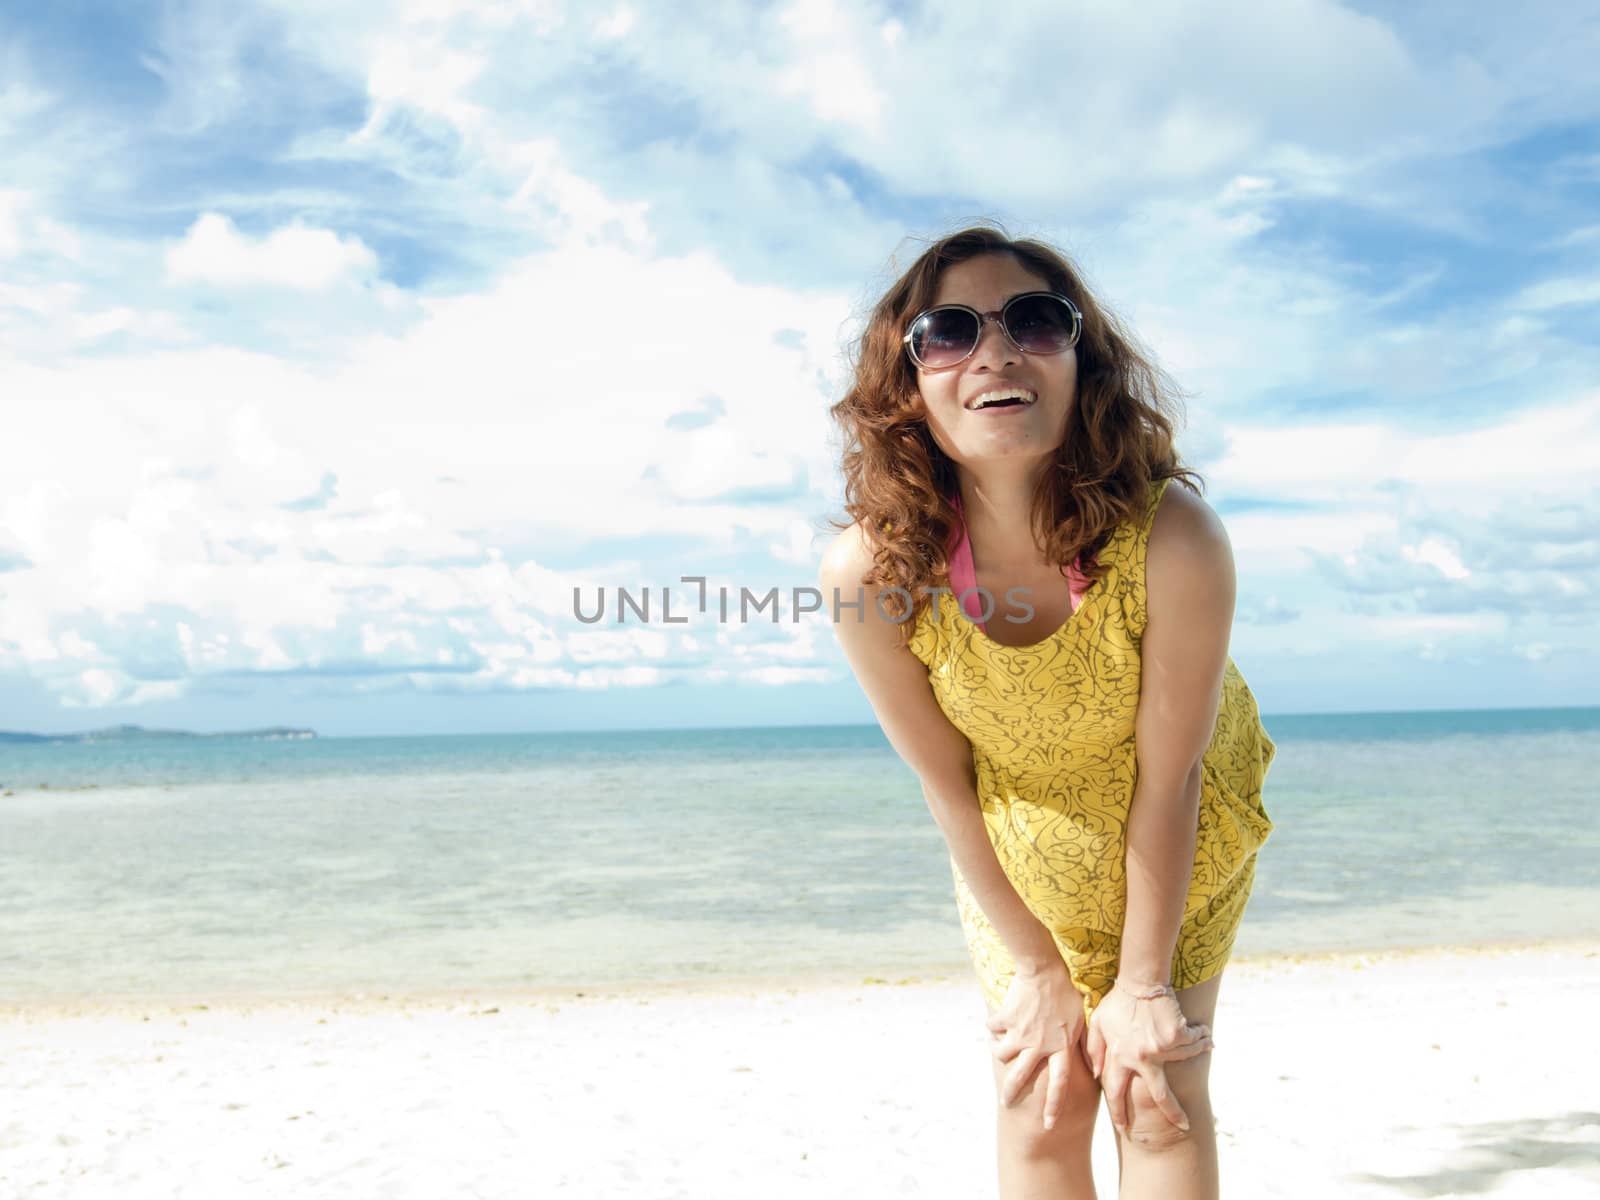 Asian Women happy on the Beach with vibrant yellow dress